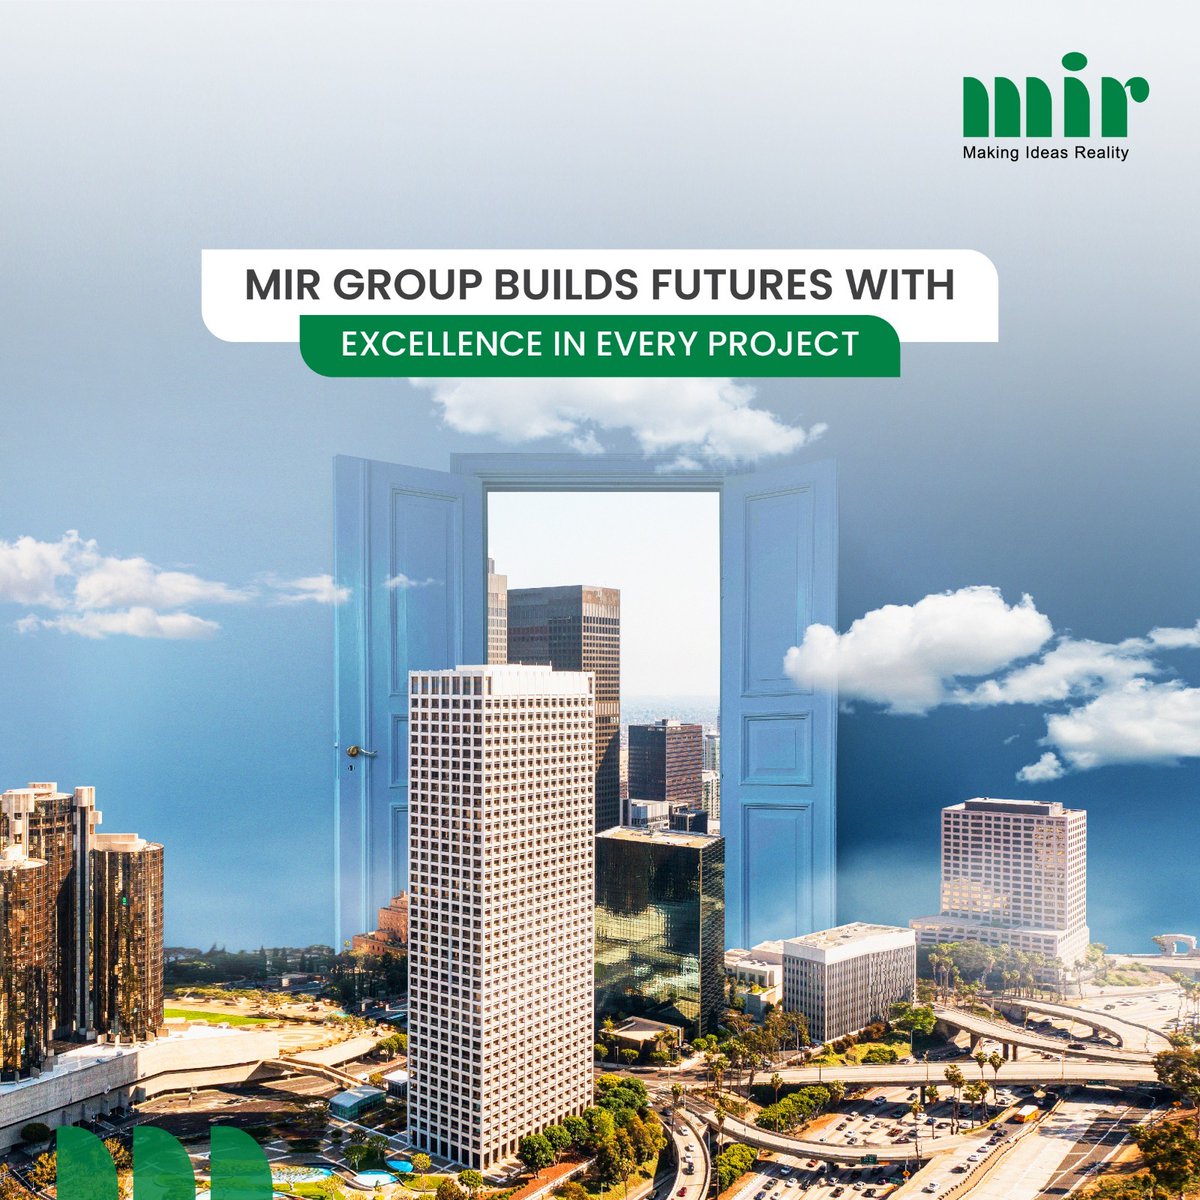 #MirGroup doesn't just construct buildings; we sculpt the future. Our commitment to excellence resonates in every facet of our diversified contributions to the nation's development.

mirgroupbd.com

#MakingIdeasReality
#BuildingTheFuture #BuiltToLast
#DreamsToReality